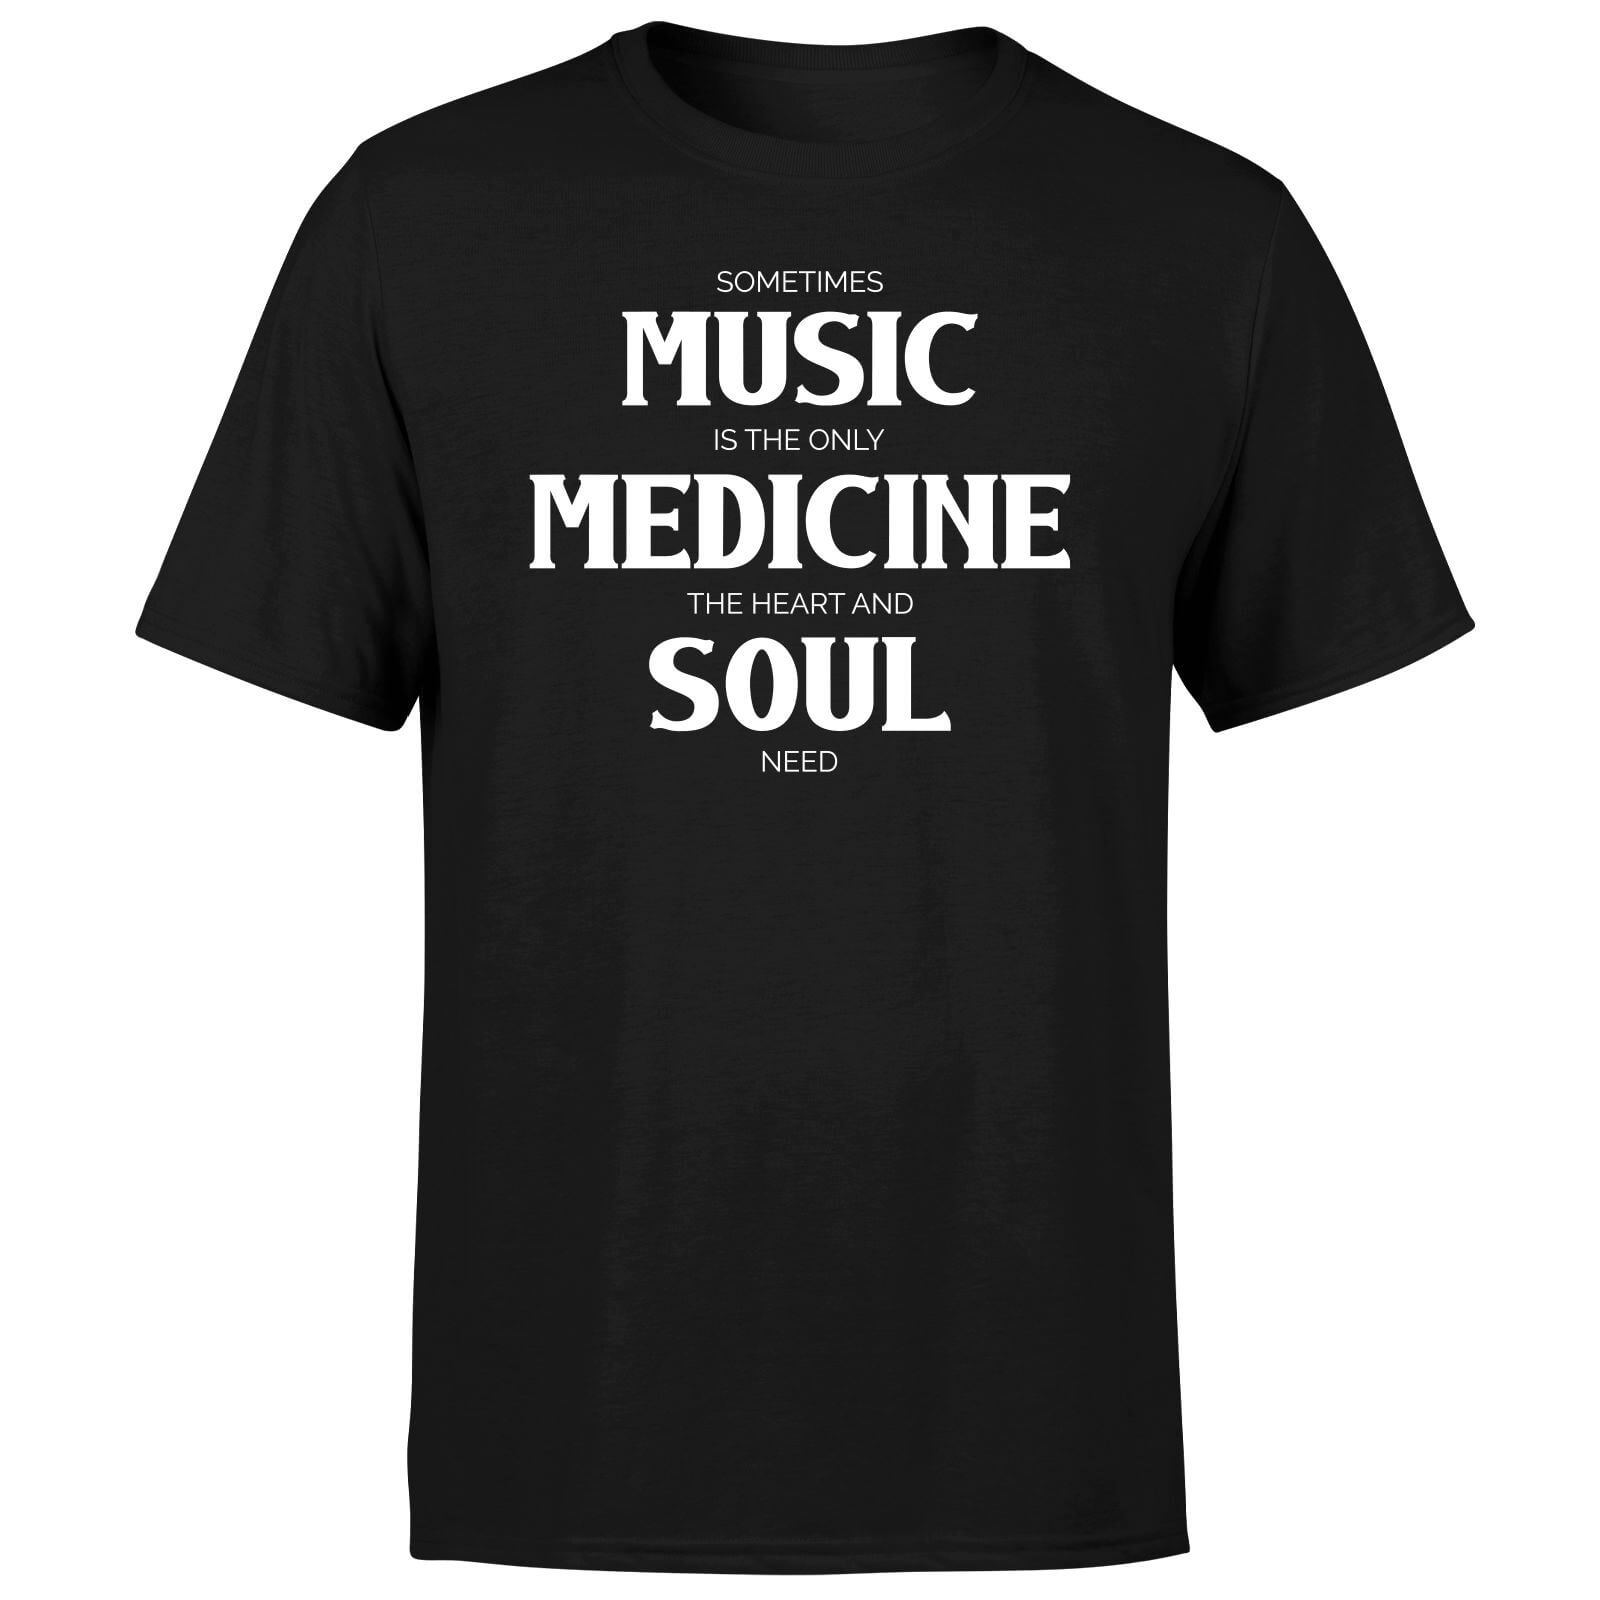 Sometimes Music Is The Only Medicine The Heart And Soul Need Men's T-Shirt - Black - XS - Black